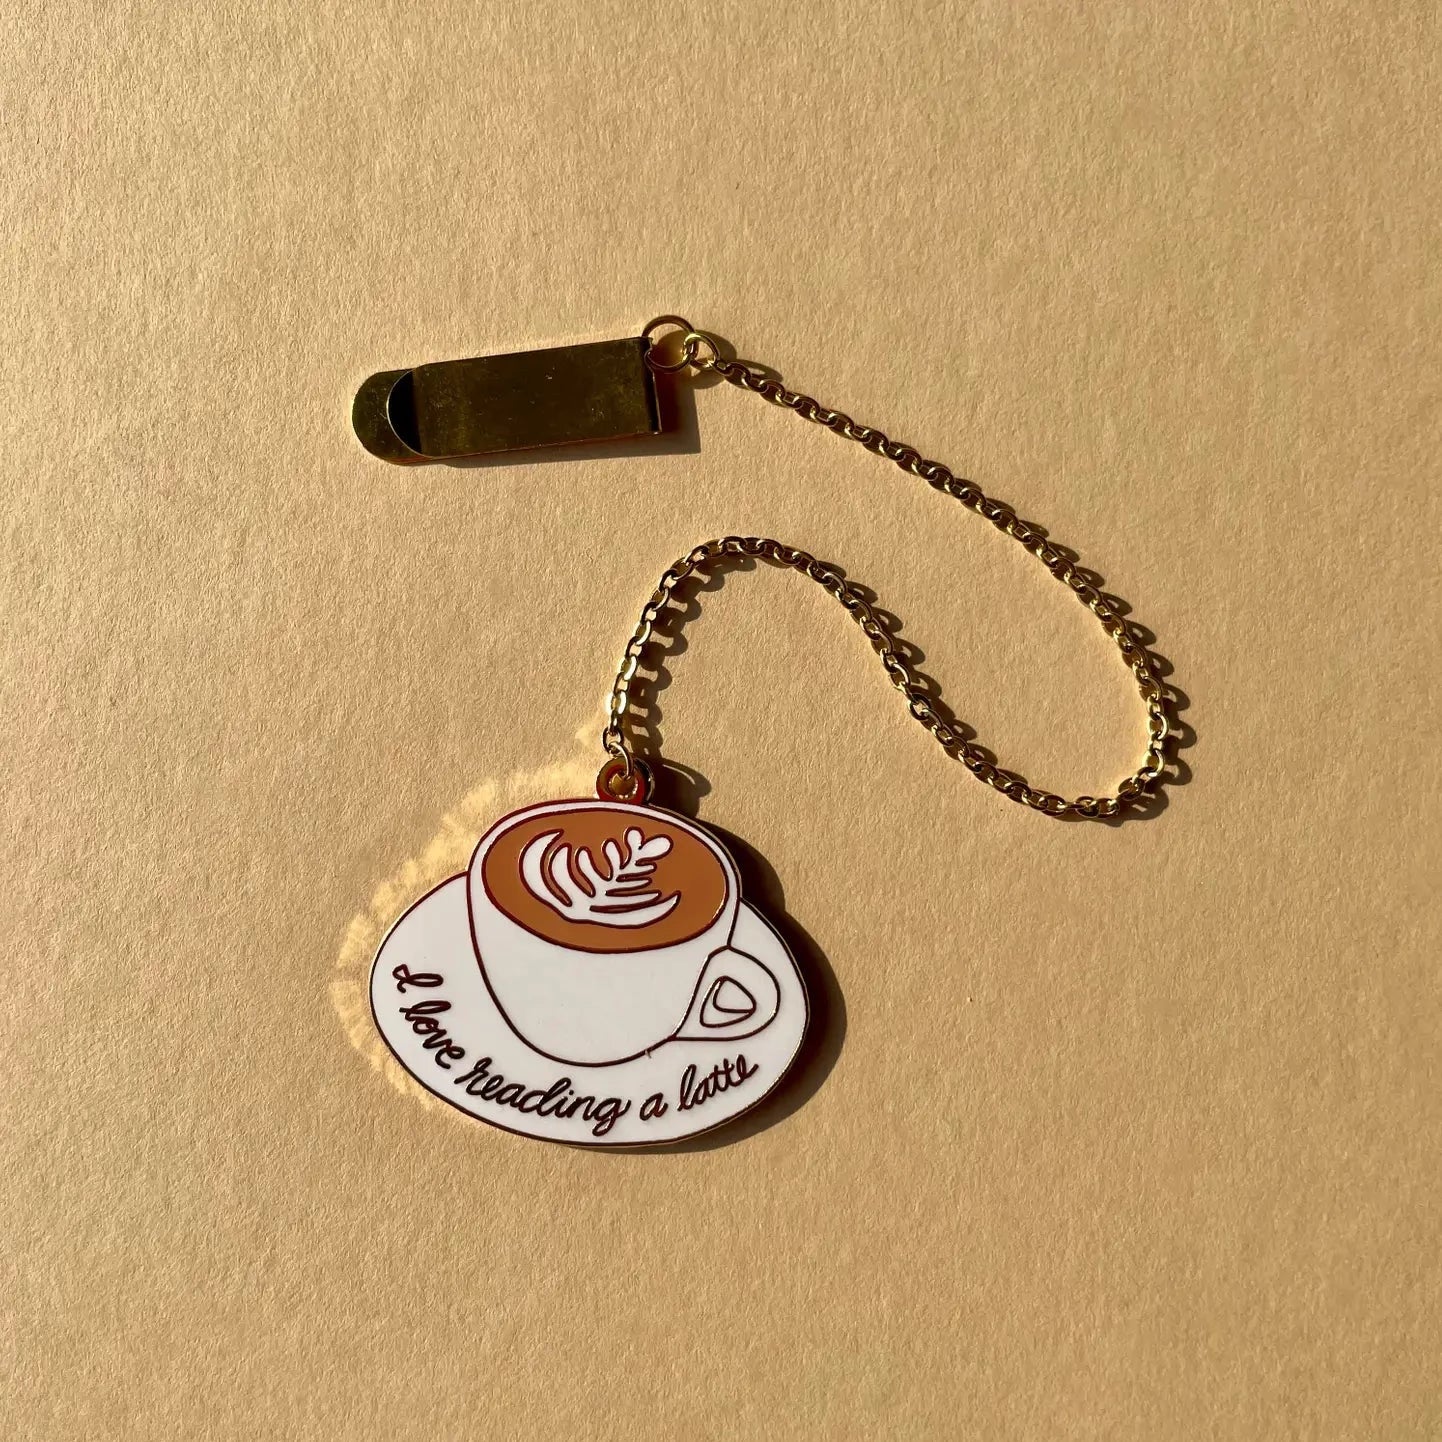 Enamel bookmark with gold chain and clip. Bookmark is a white cup with serving plate, inside the cup is a latter. Across the plate in gold text is printed &quot;I Love reading a latte&quot;